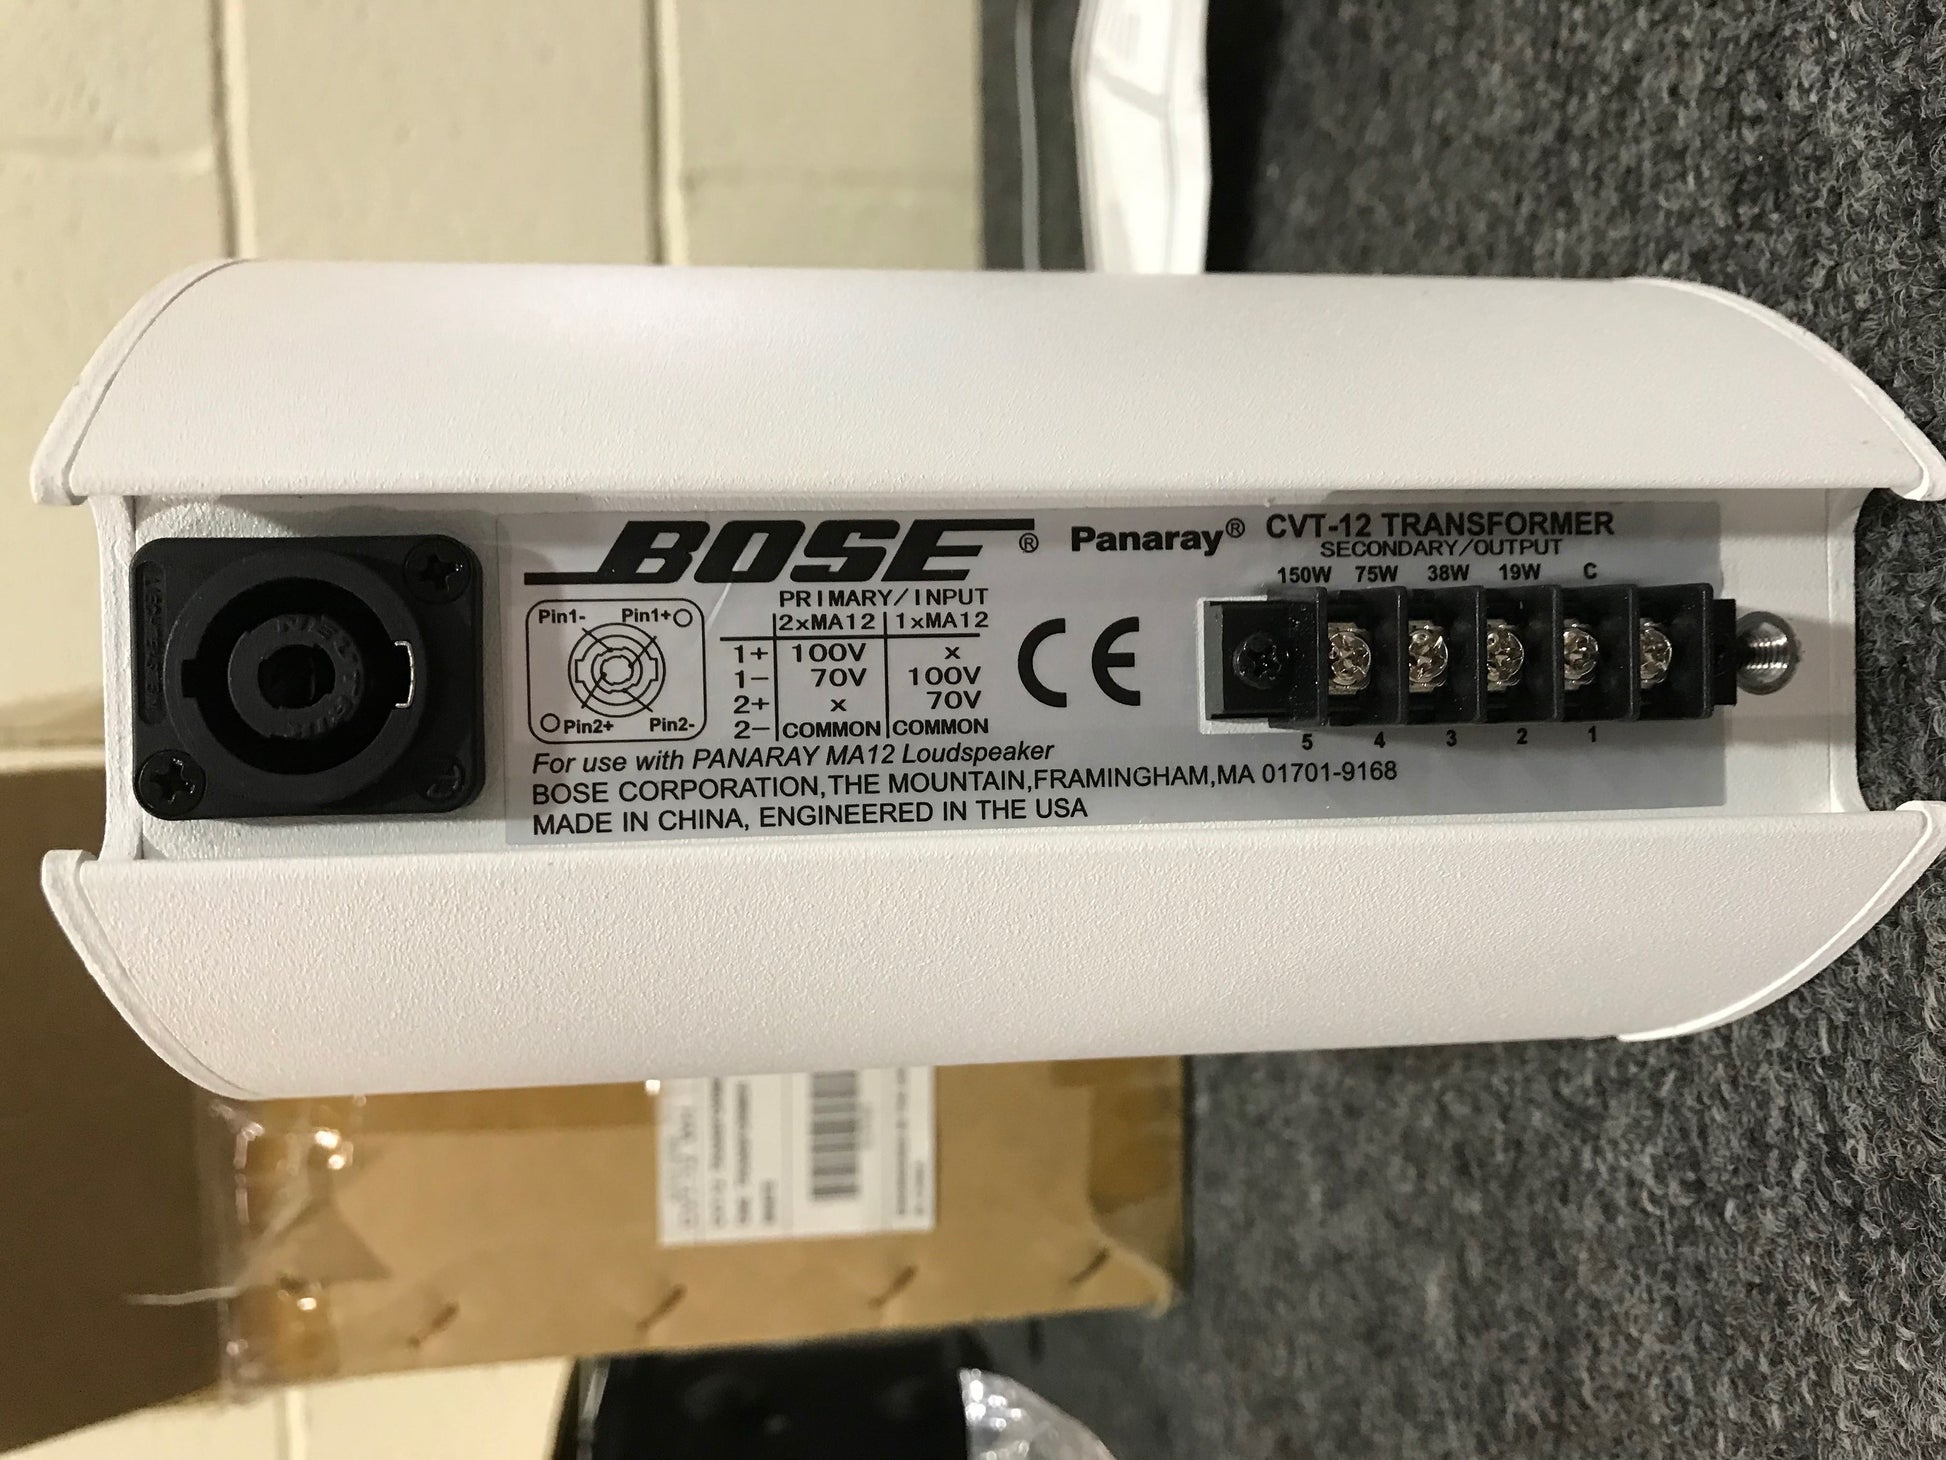 New Bose CVT-12 70volt Transformers for Sale, We Sell Professional Audio Equipment. Audio Systems, Amplifiers, Consoles, Mixers, Electronics, Entertainment, Sound, Live